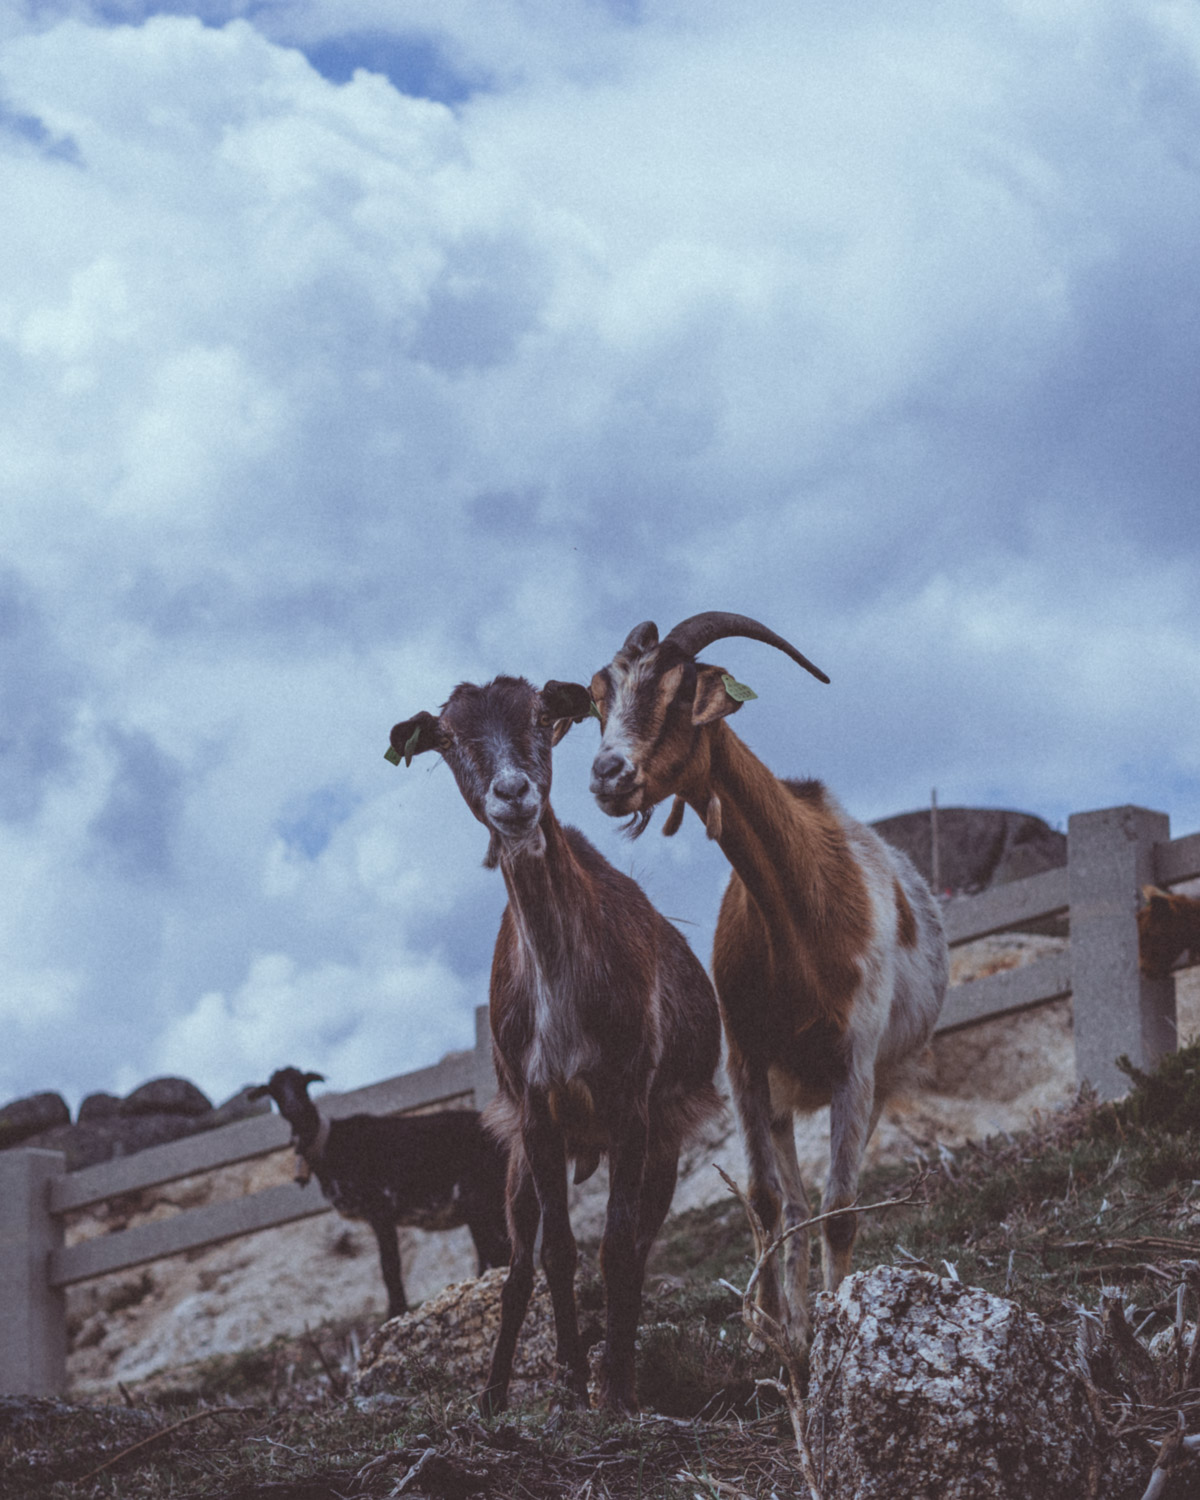 Two goats with cloudy sky behind